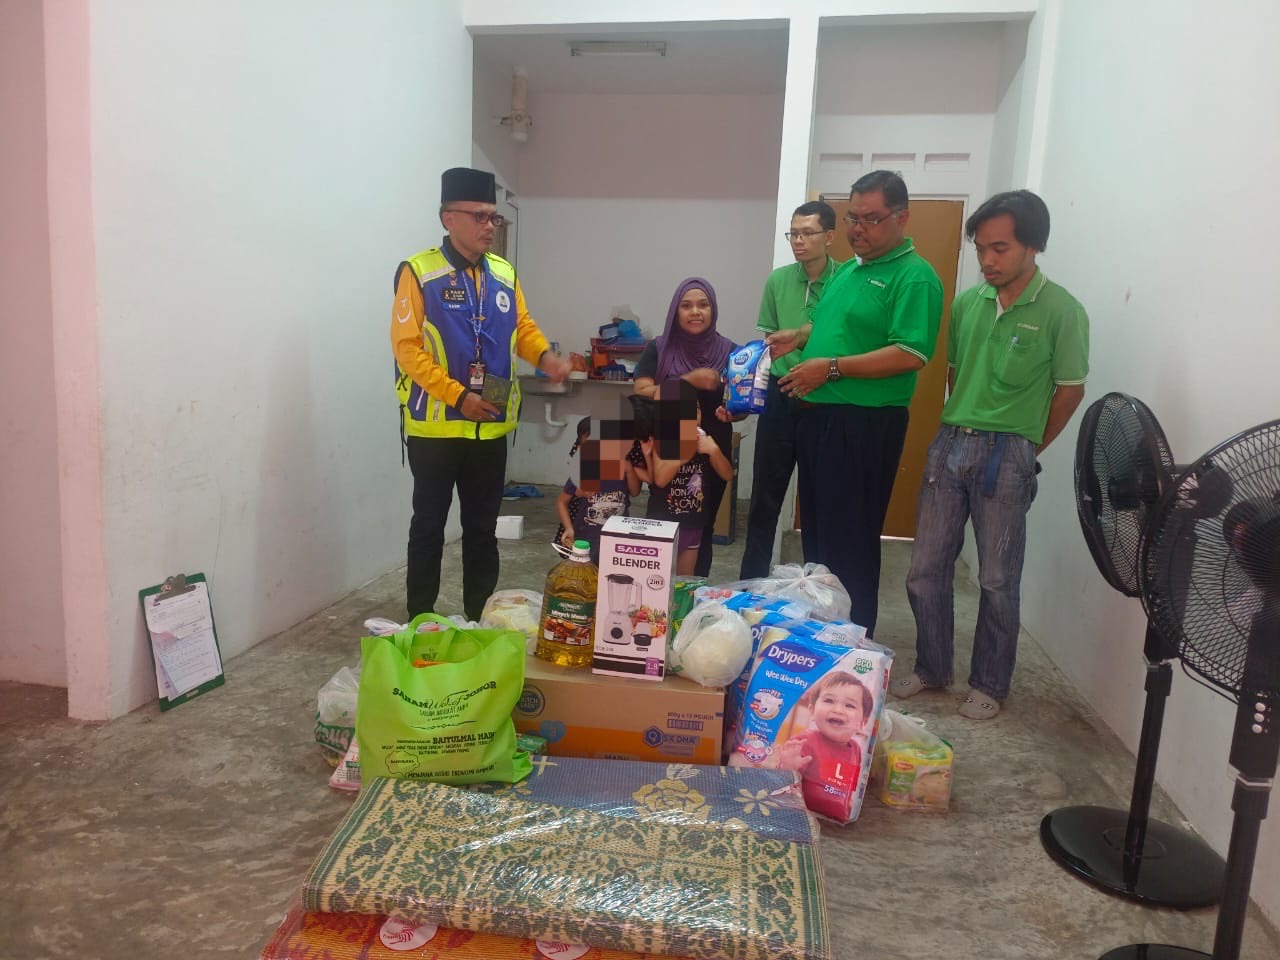 Johor islamic religious council (maij), jejak asnaf, and the general manager of econsave cash and carry supermarket, mas imran adam, paid a visit to siti nurfarahim.